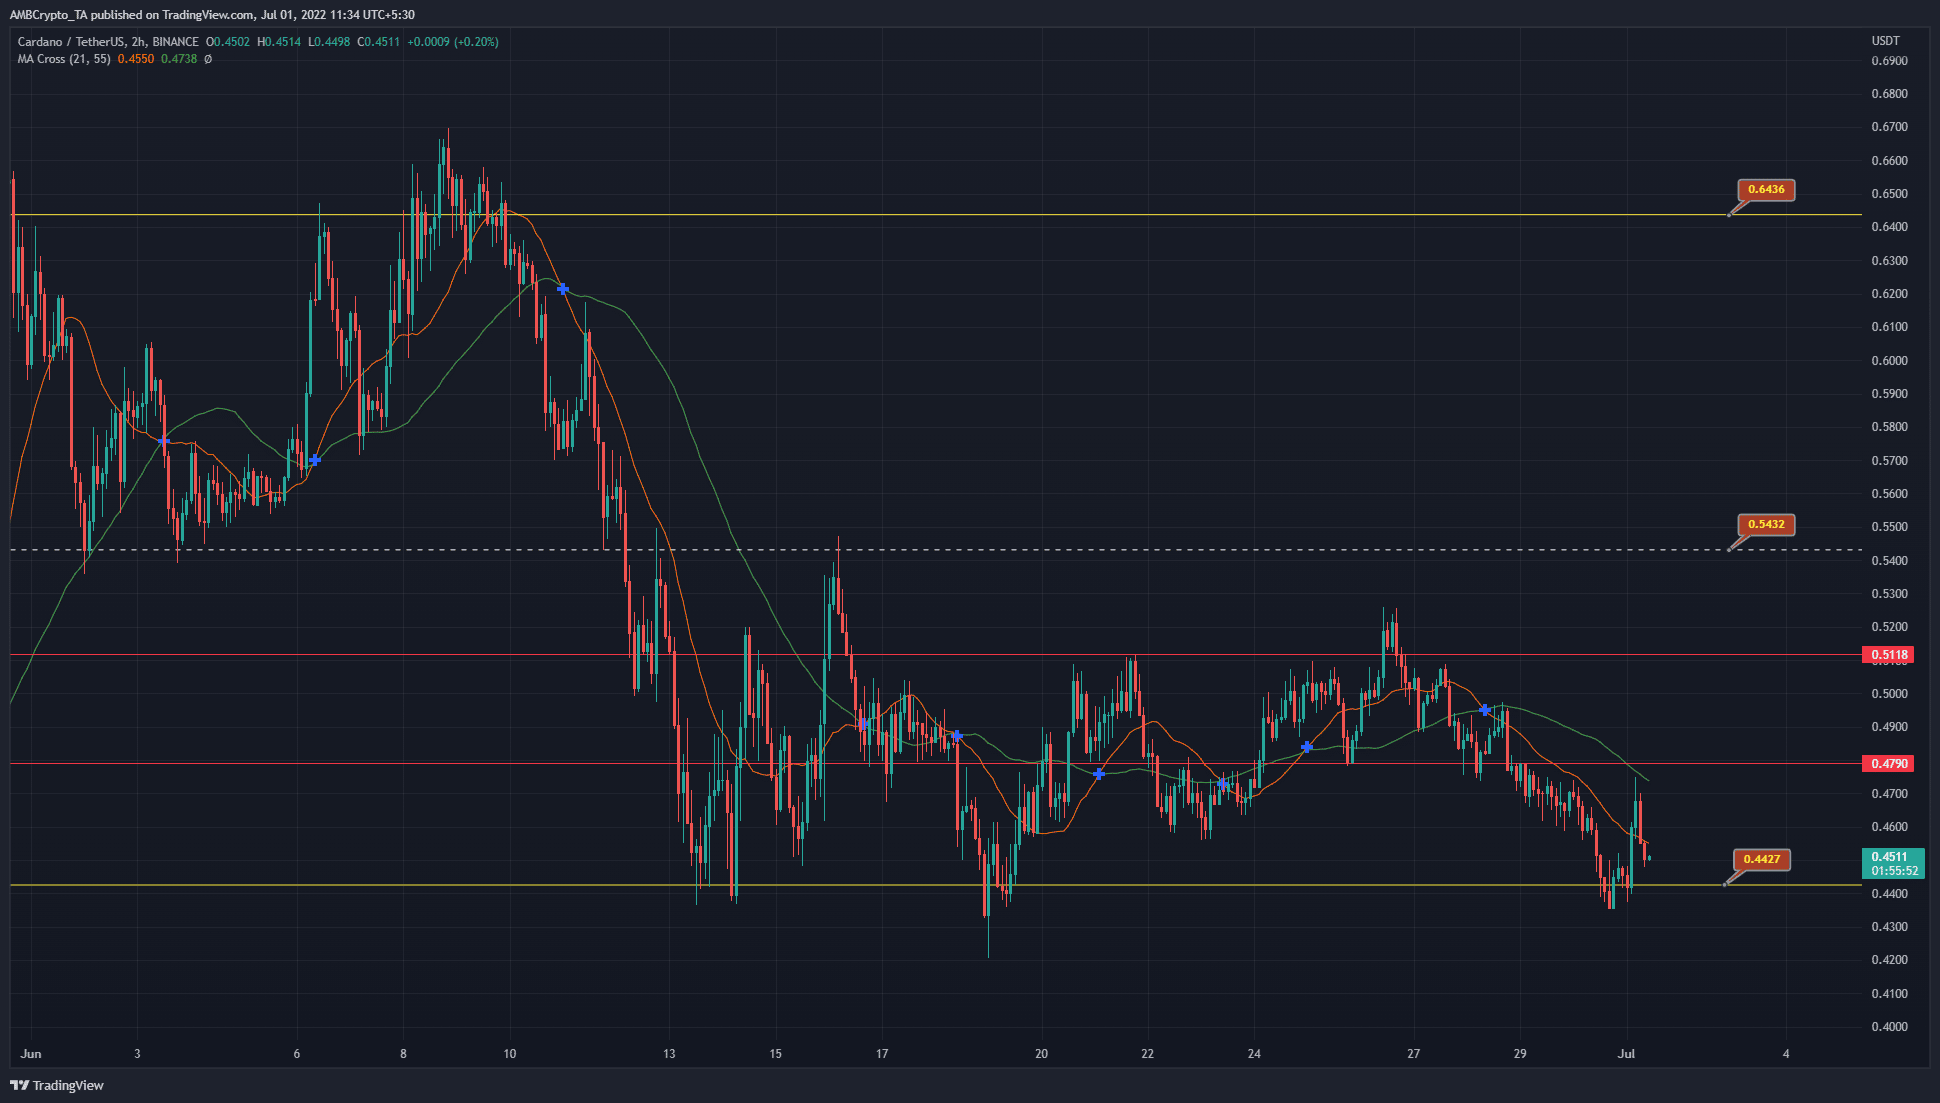 Cardano slips beneath a local supply zone, but this demand region could see yet another bounce